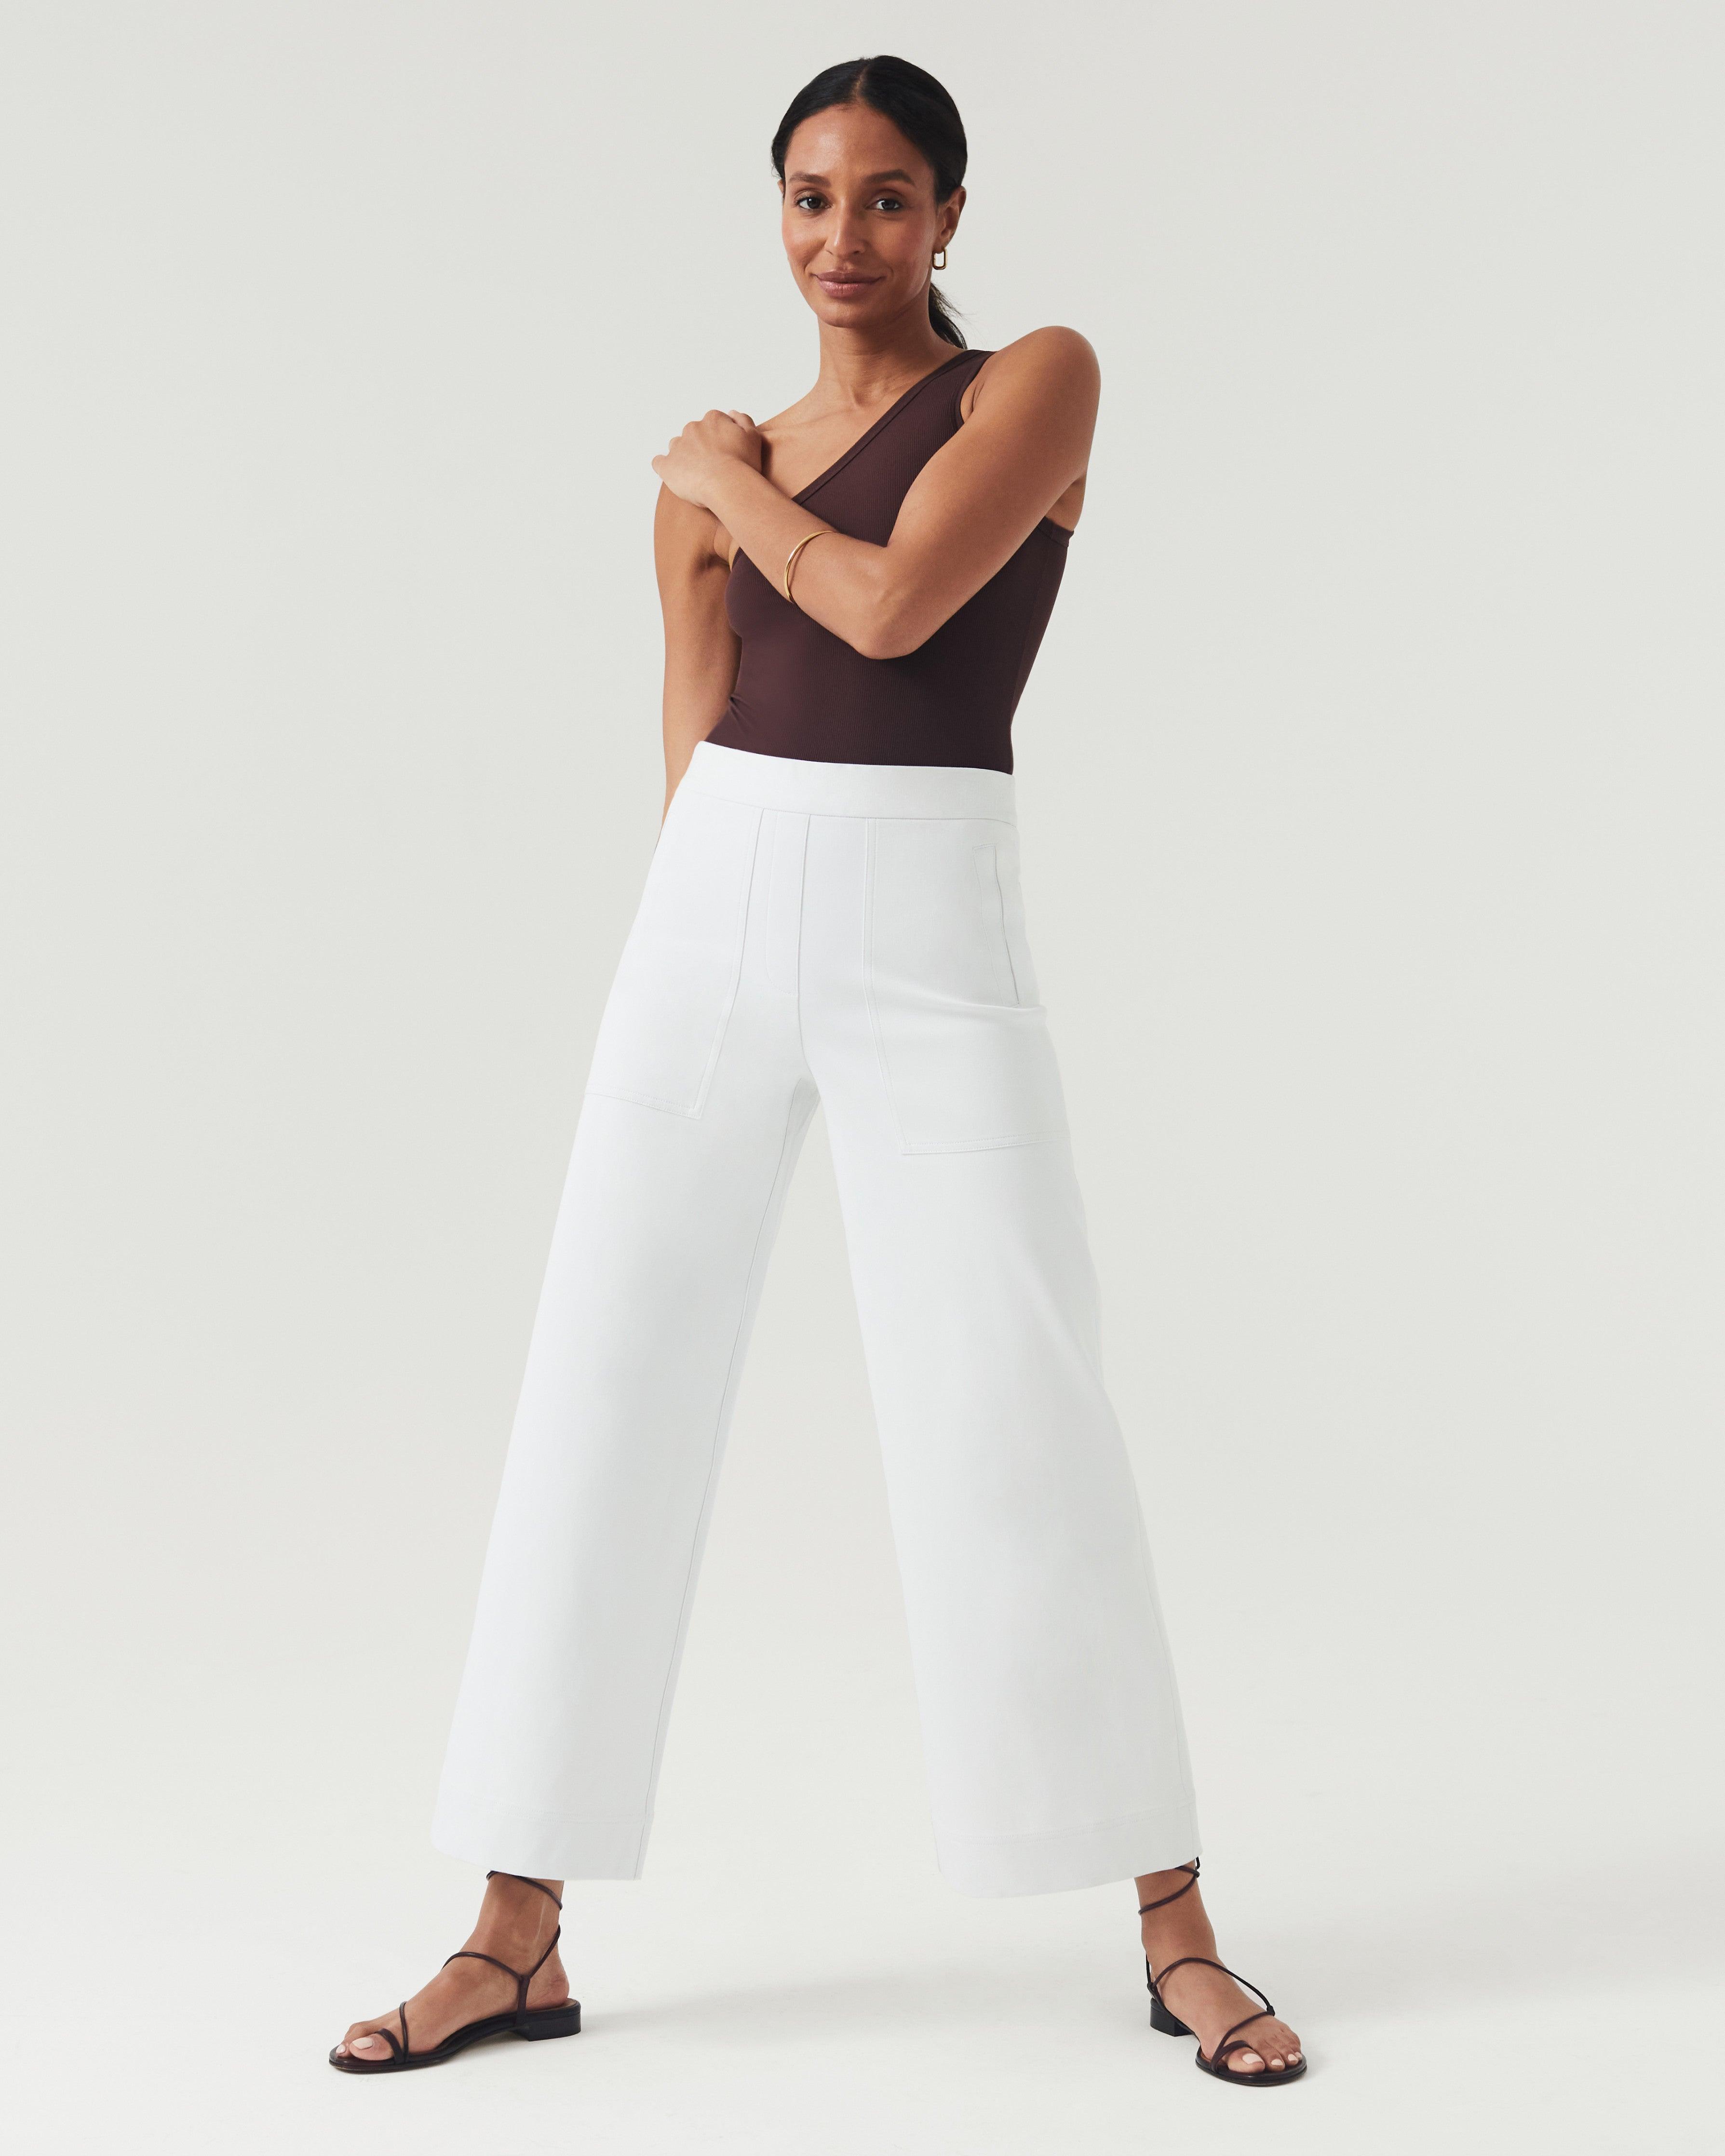 https://cdna.lystit.com/photos/spanx/0a92c053/spanx-Classic-White-On-the-go-Wide-Leg-Pant-With-Ultimate-Opacity-Technology.jpeg